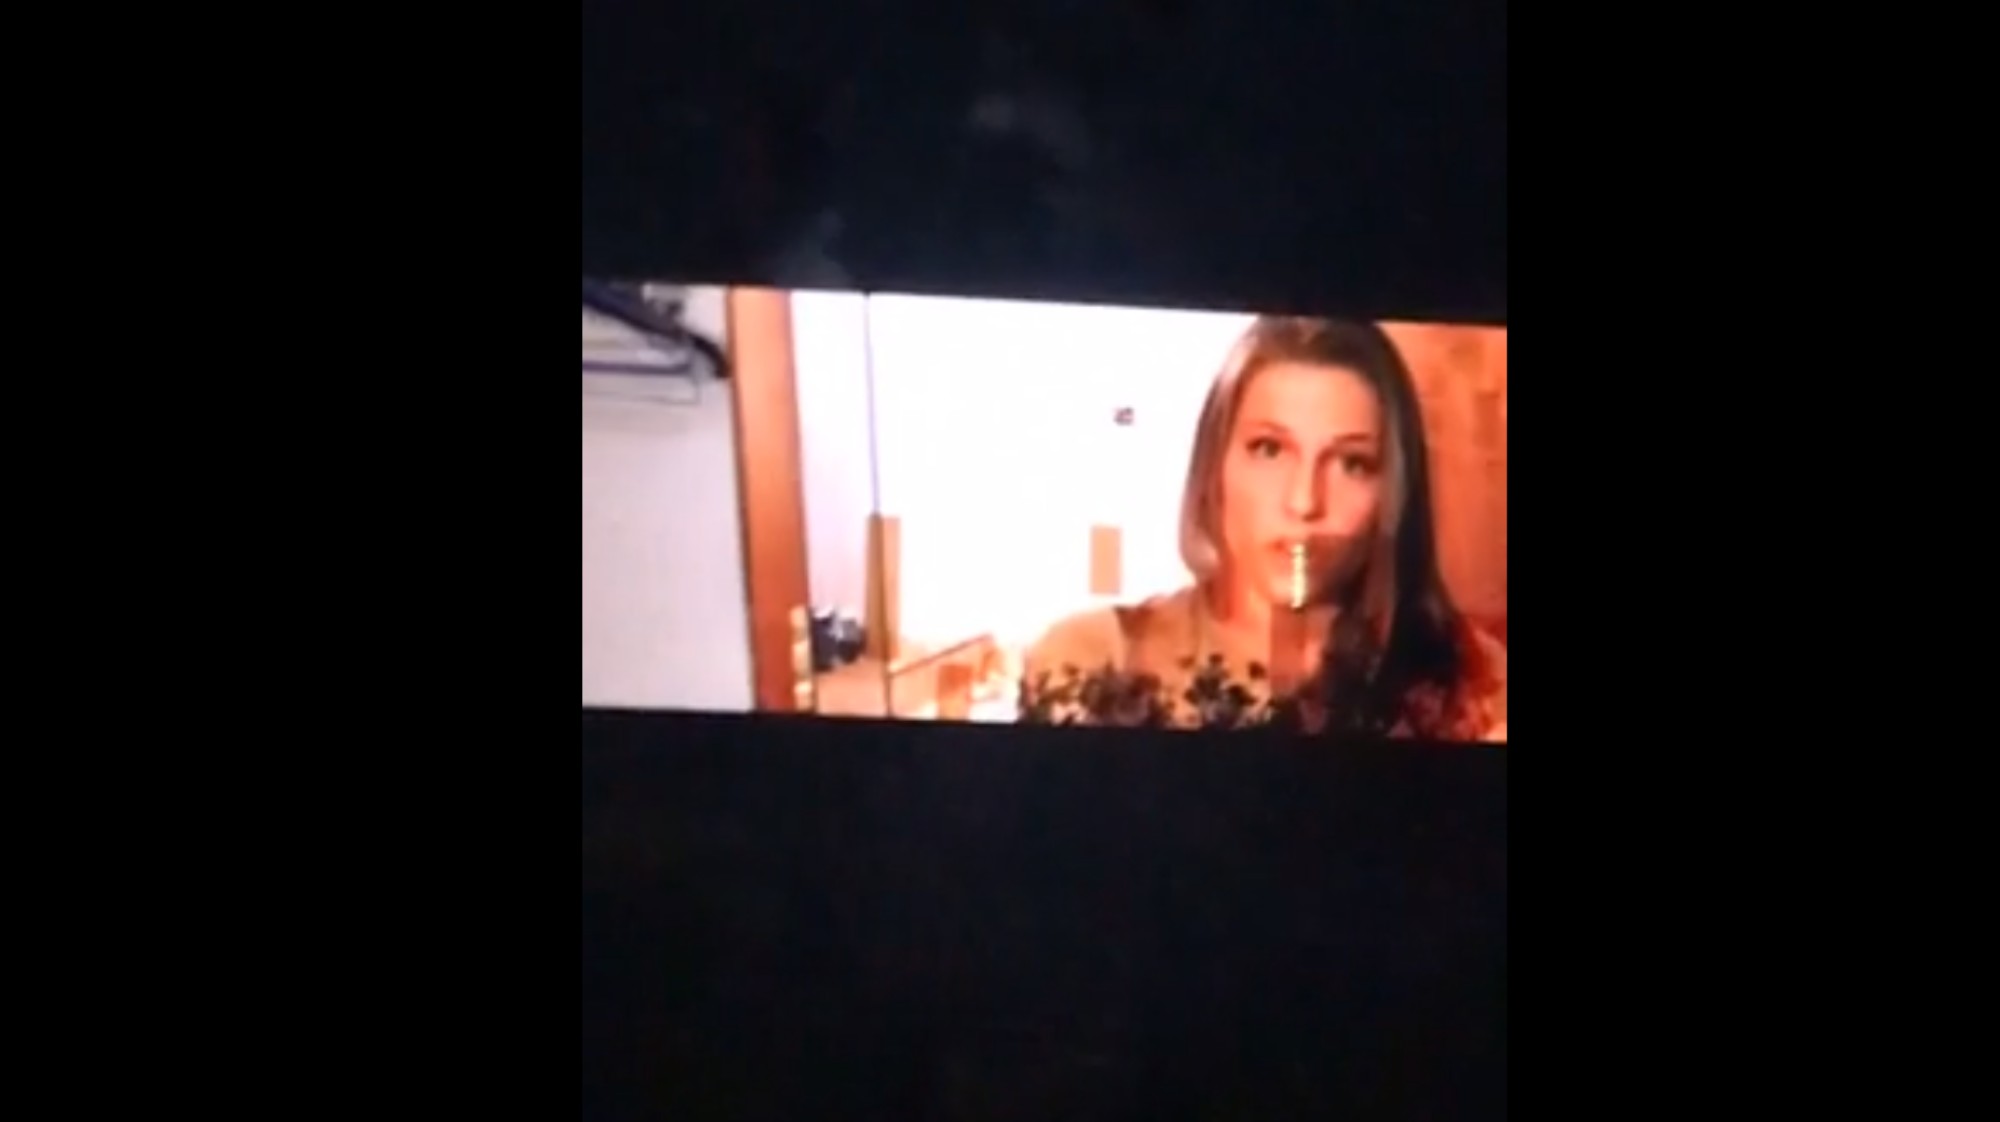 Reddit Nsfw Blowjobs - Threesome Blowjob Scene on Giant Highway Billboard Could ...